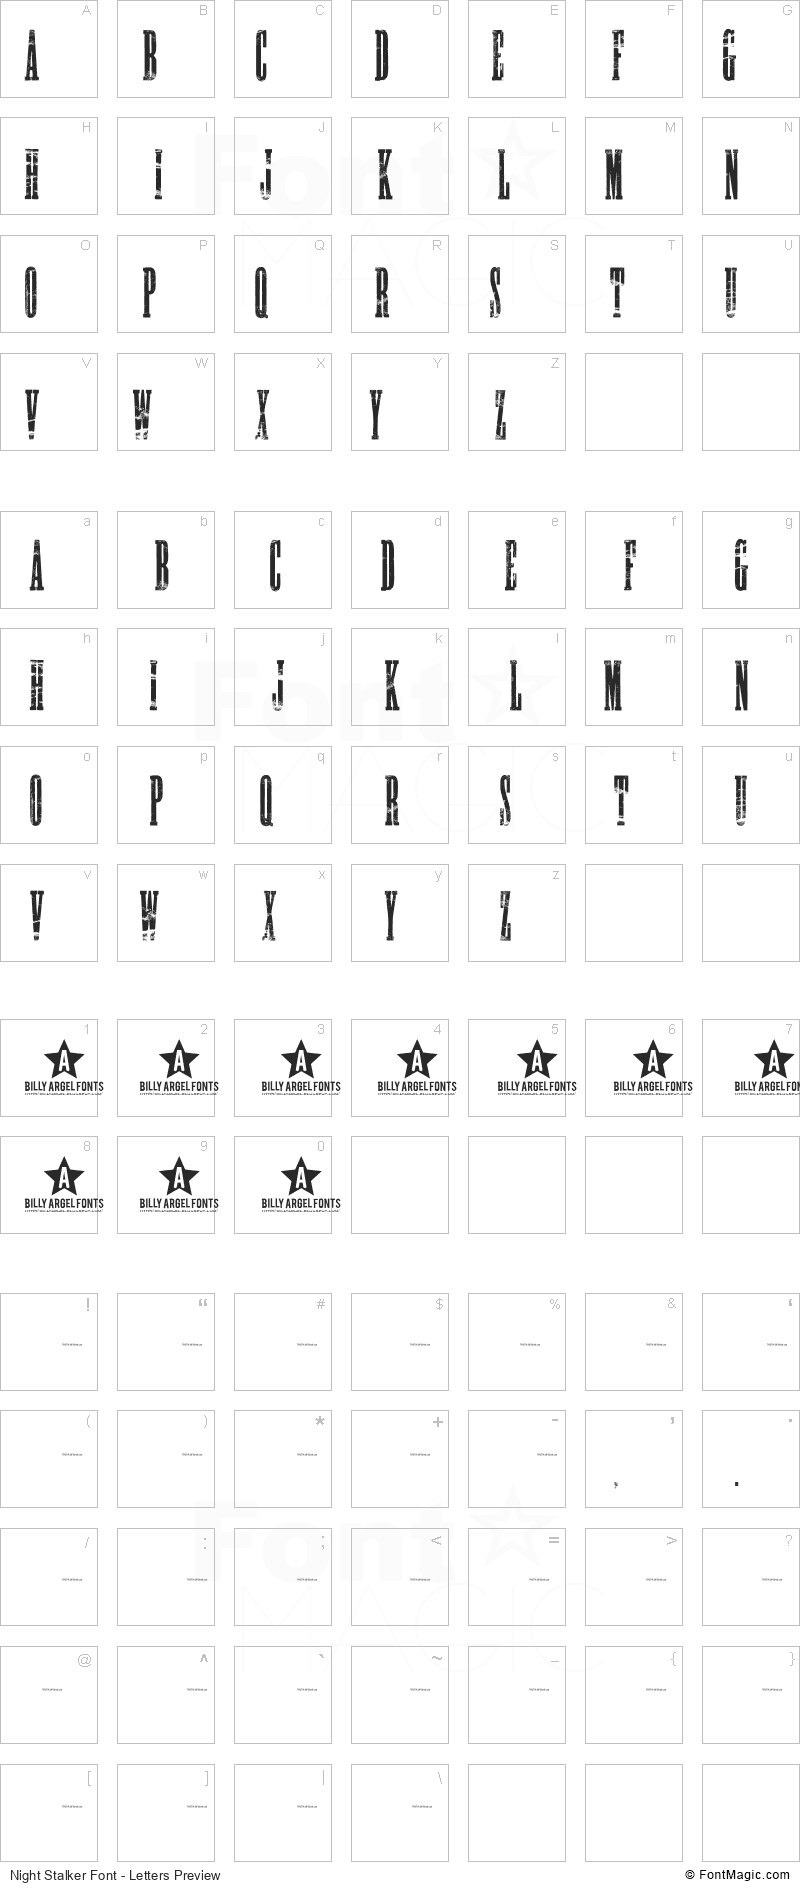 Night Stalker Font - All Latters Preview Chart